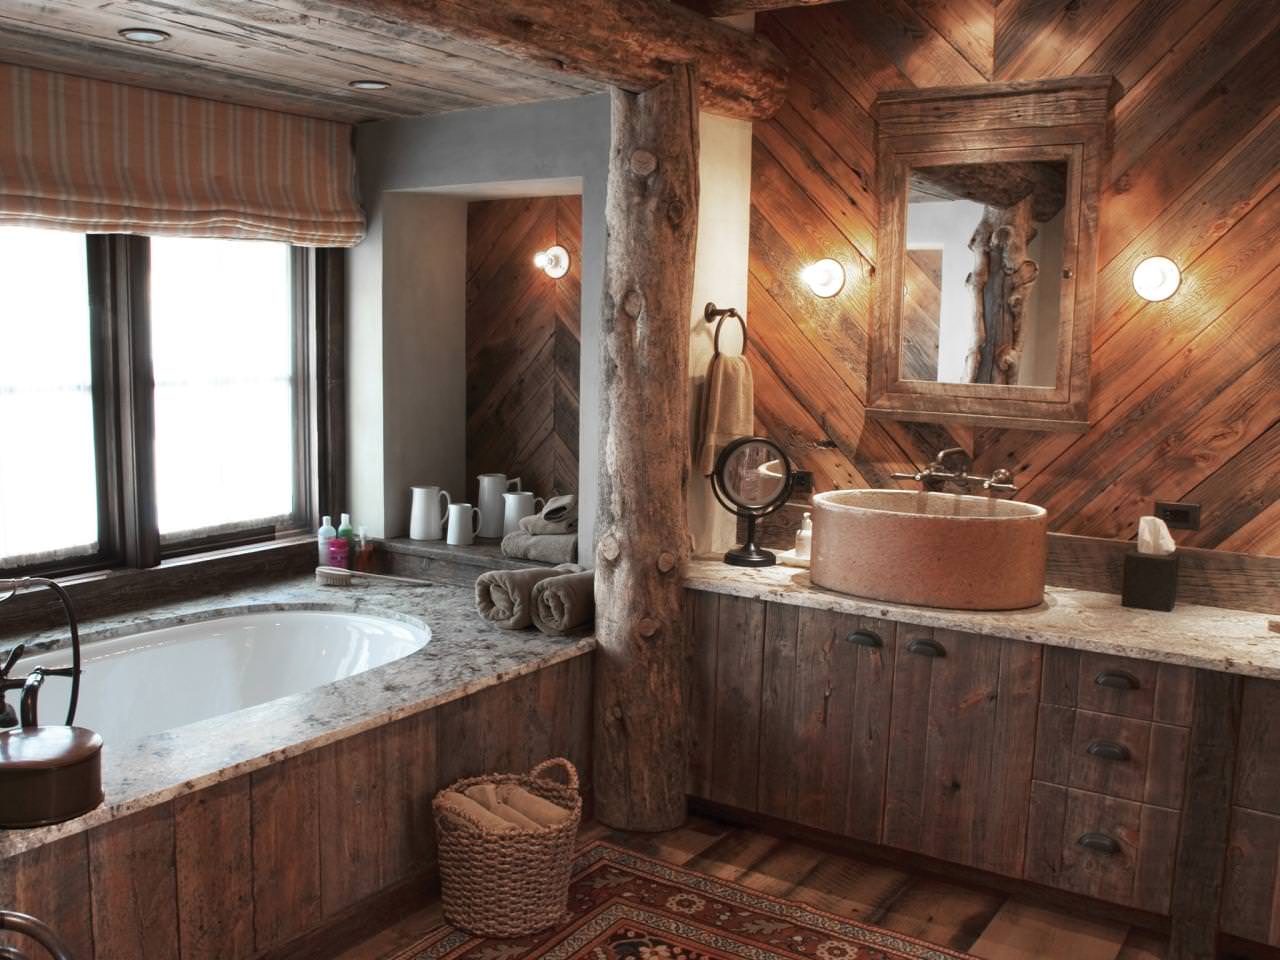 Bathroom in a wooden house: photo of the interior of a beautiful finish in a house from a bar